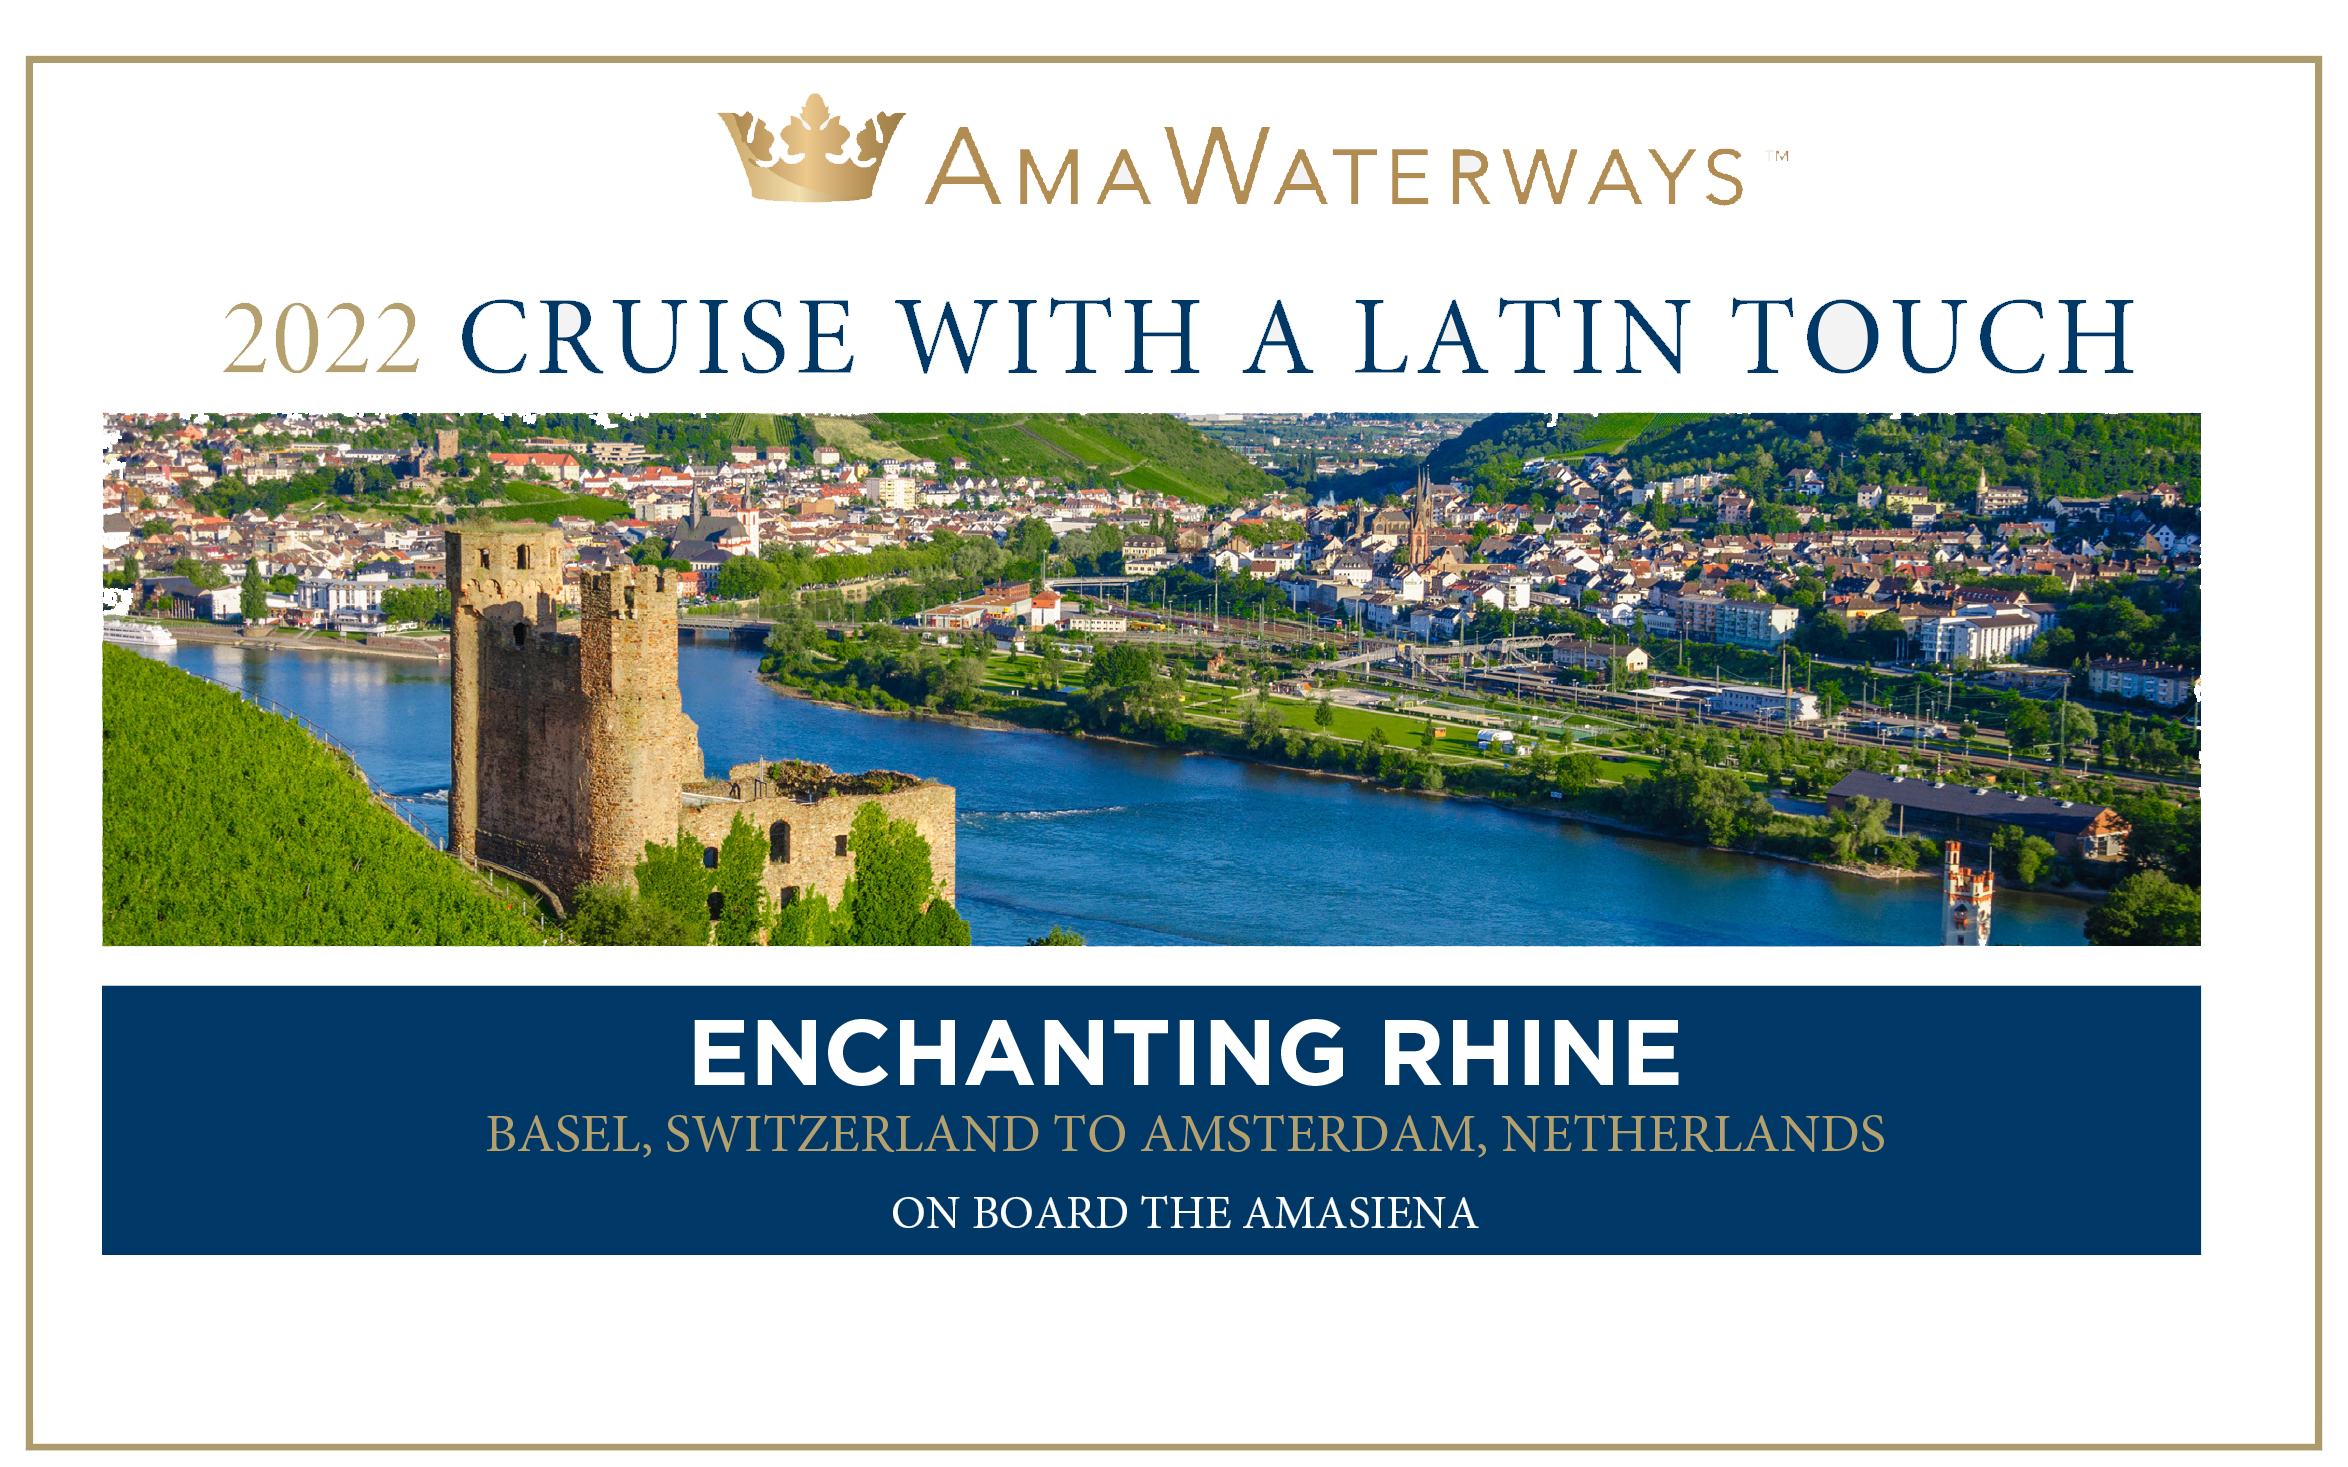 Travel with Ama Latin Tour and Get Up to $1,500 Cruise Savings, $100 Shipboard credit Per person, Prepaid Gratuities and More!